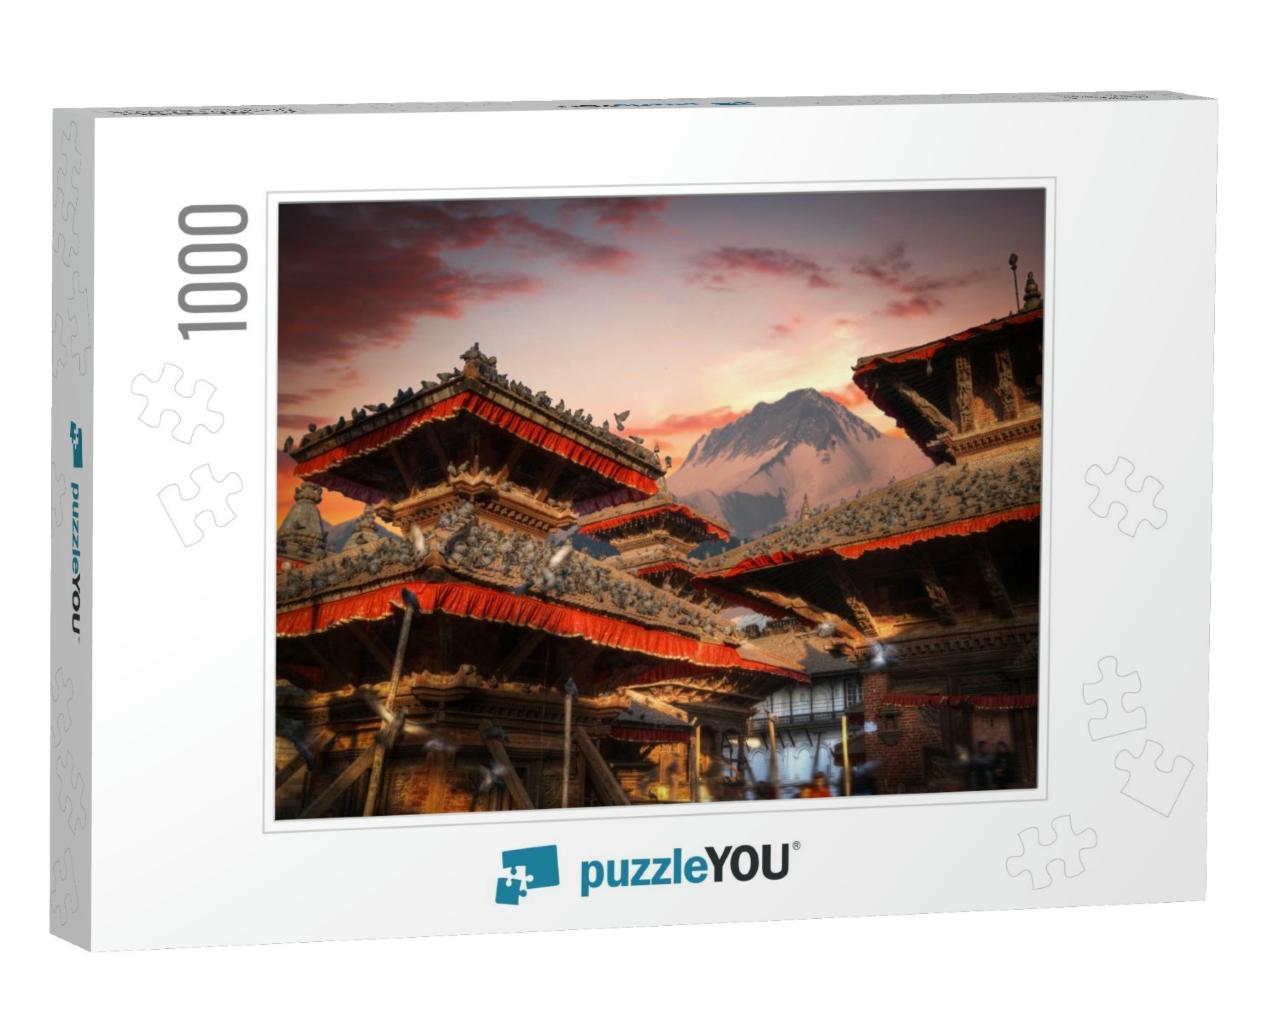 Temples of Durbar Square in Bhaktapur, Kathmandu Valley... Jigsaw Puzzle with 1000 pieces